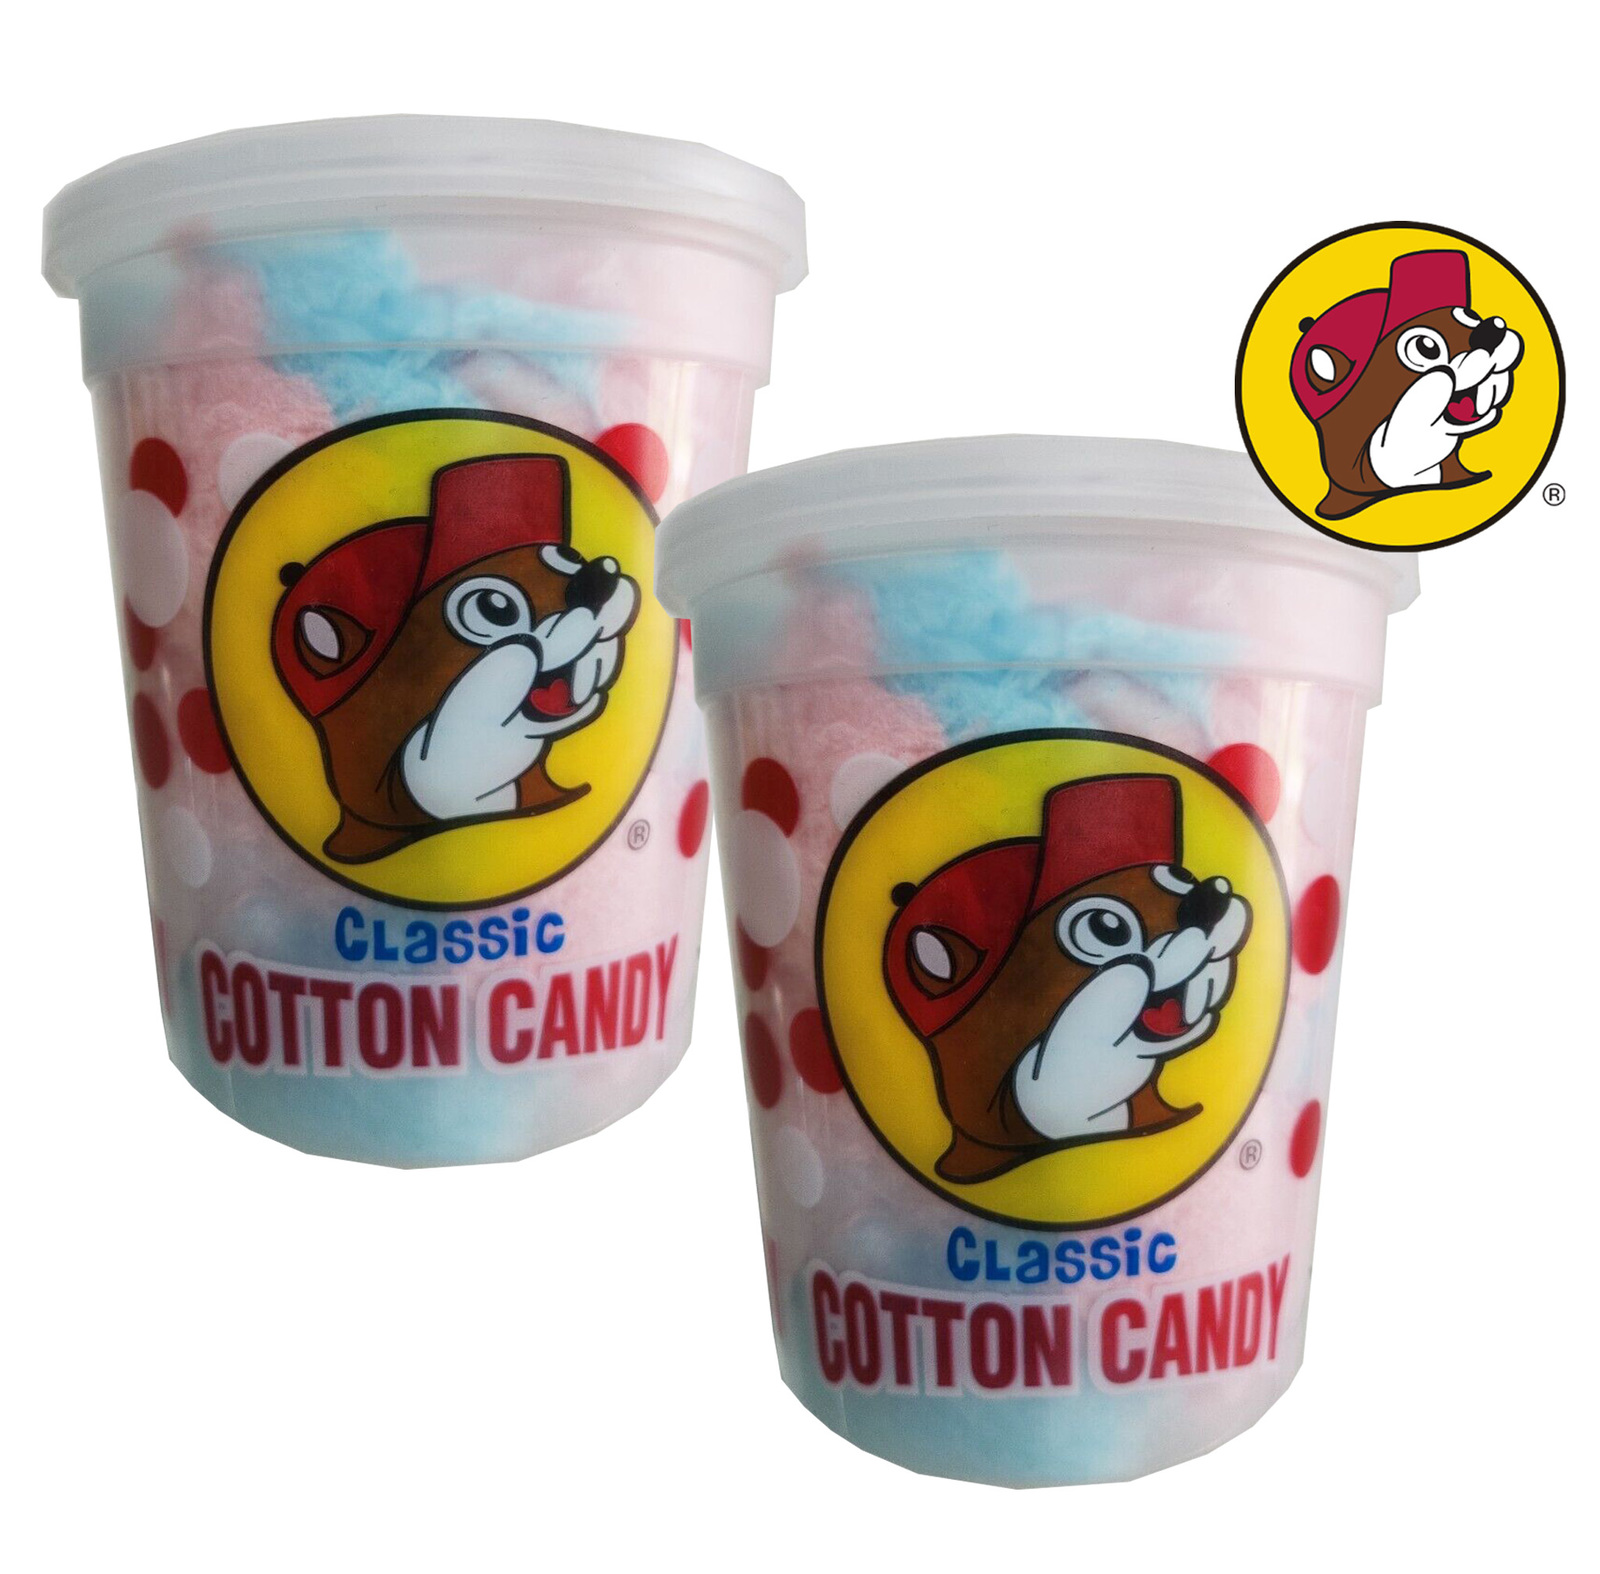 2 Packs Buc-ee's Cotton Candy 2 oz - $17.30